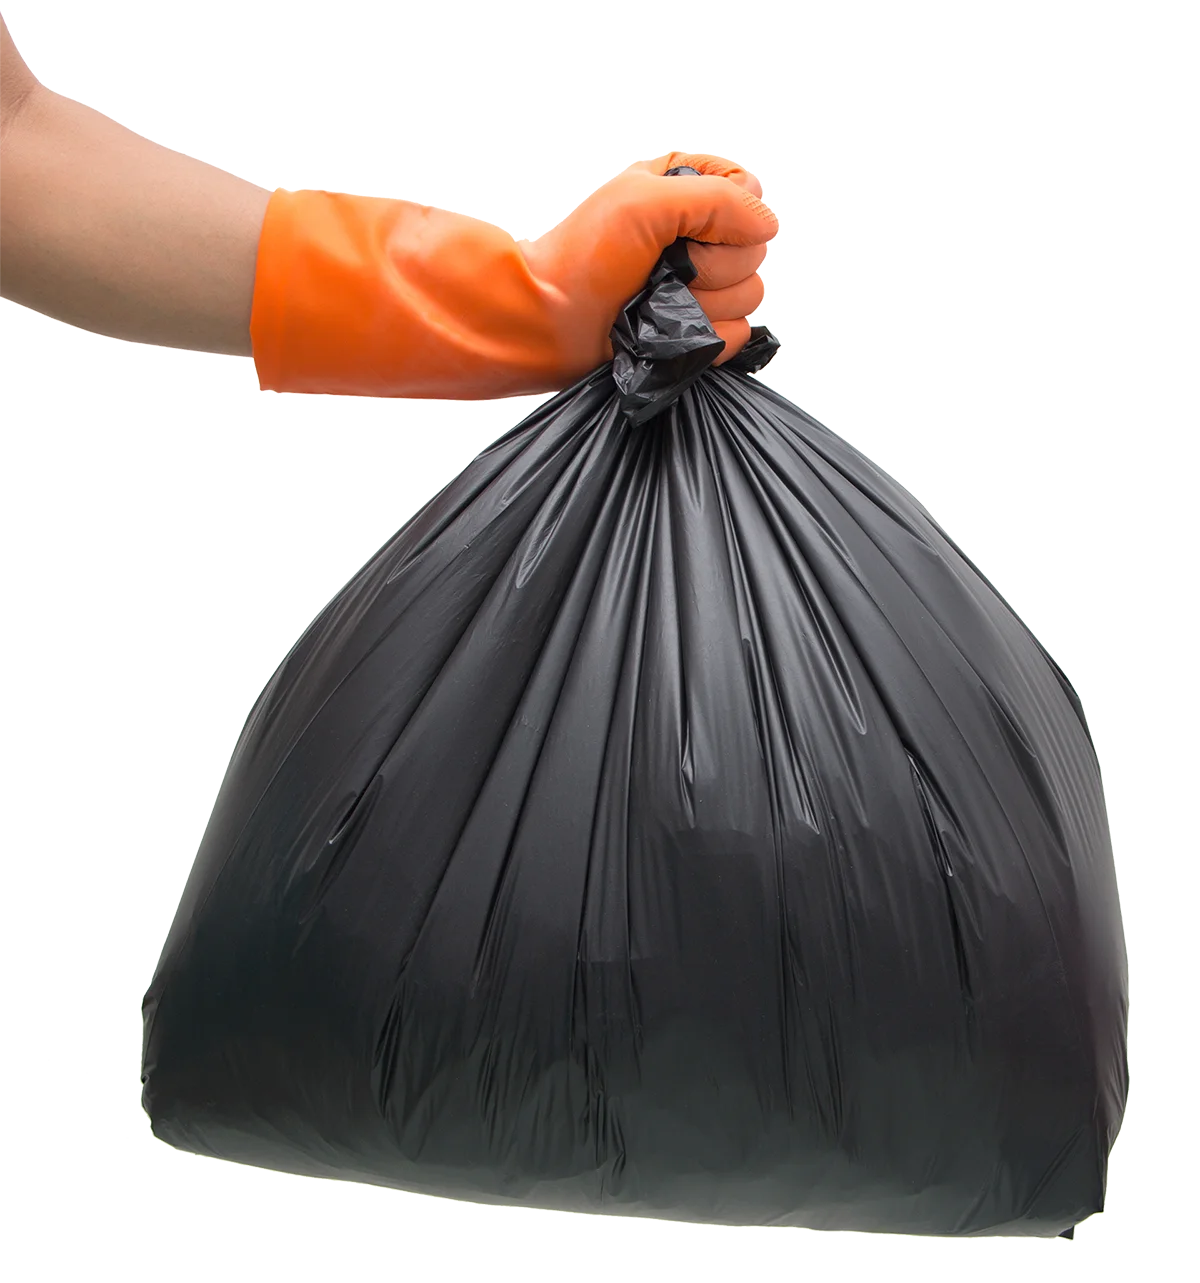 Residential Waste Service is the doorstep trash company near you that you can count on for waste removal services.